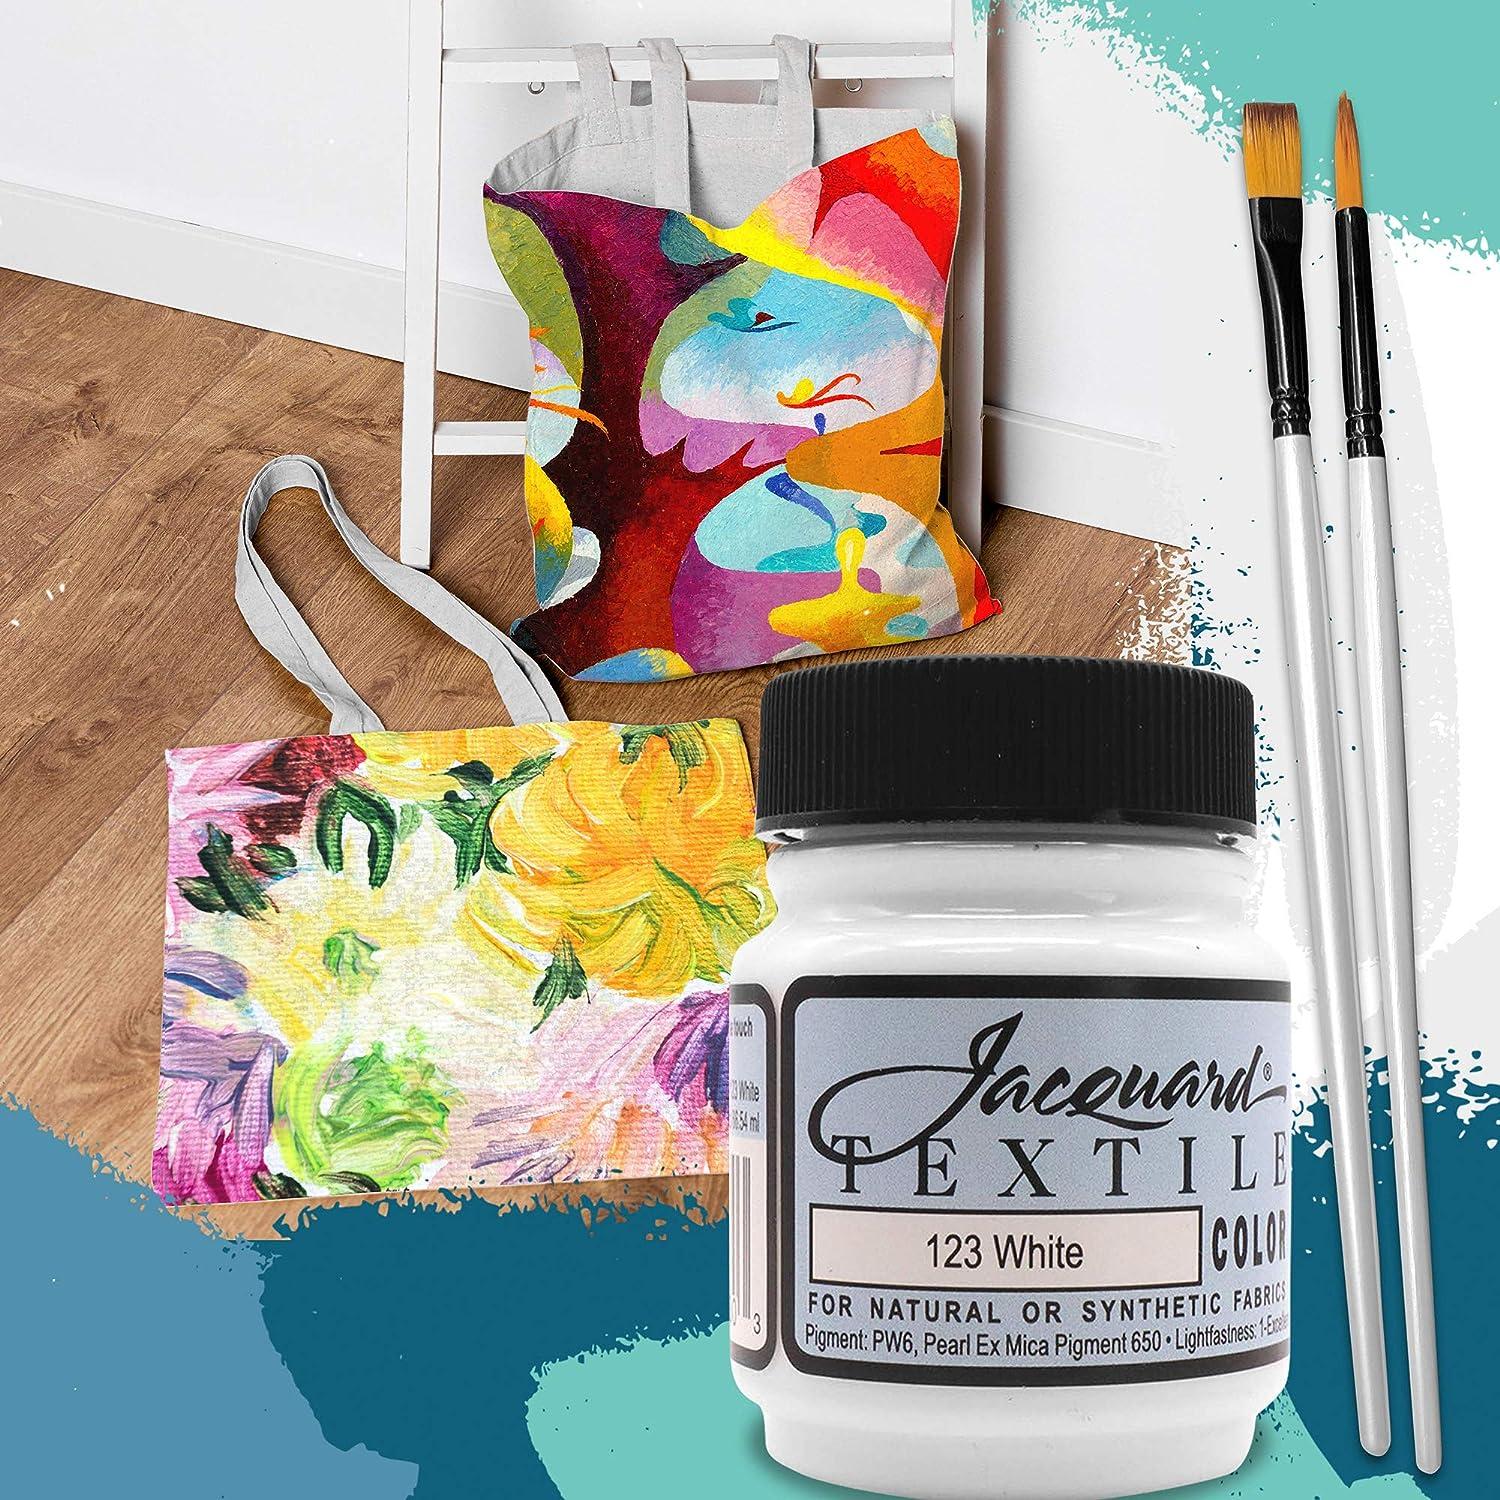 Moshify Jacquard Products White Textile Color Fabric Paint Made in USA -  JAC1123 2.25-Ounces - Bundled Brush Set 3 Piece Set